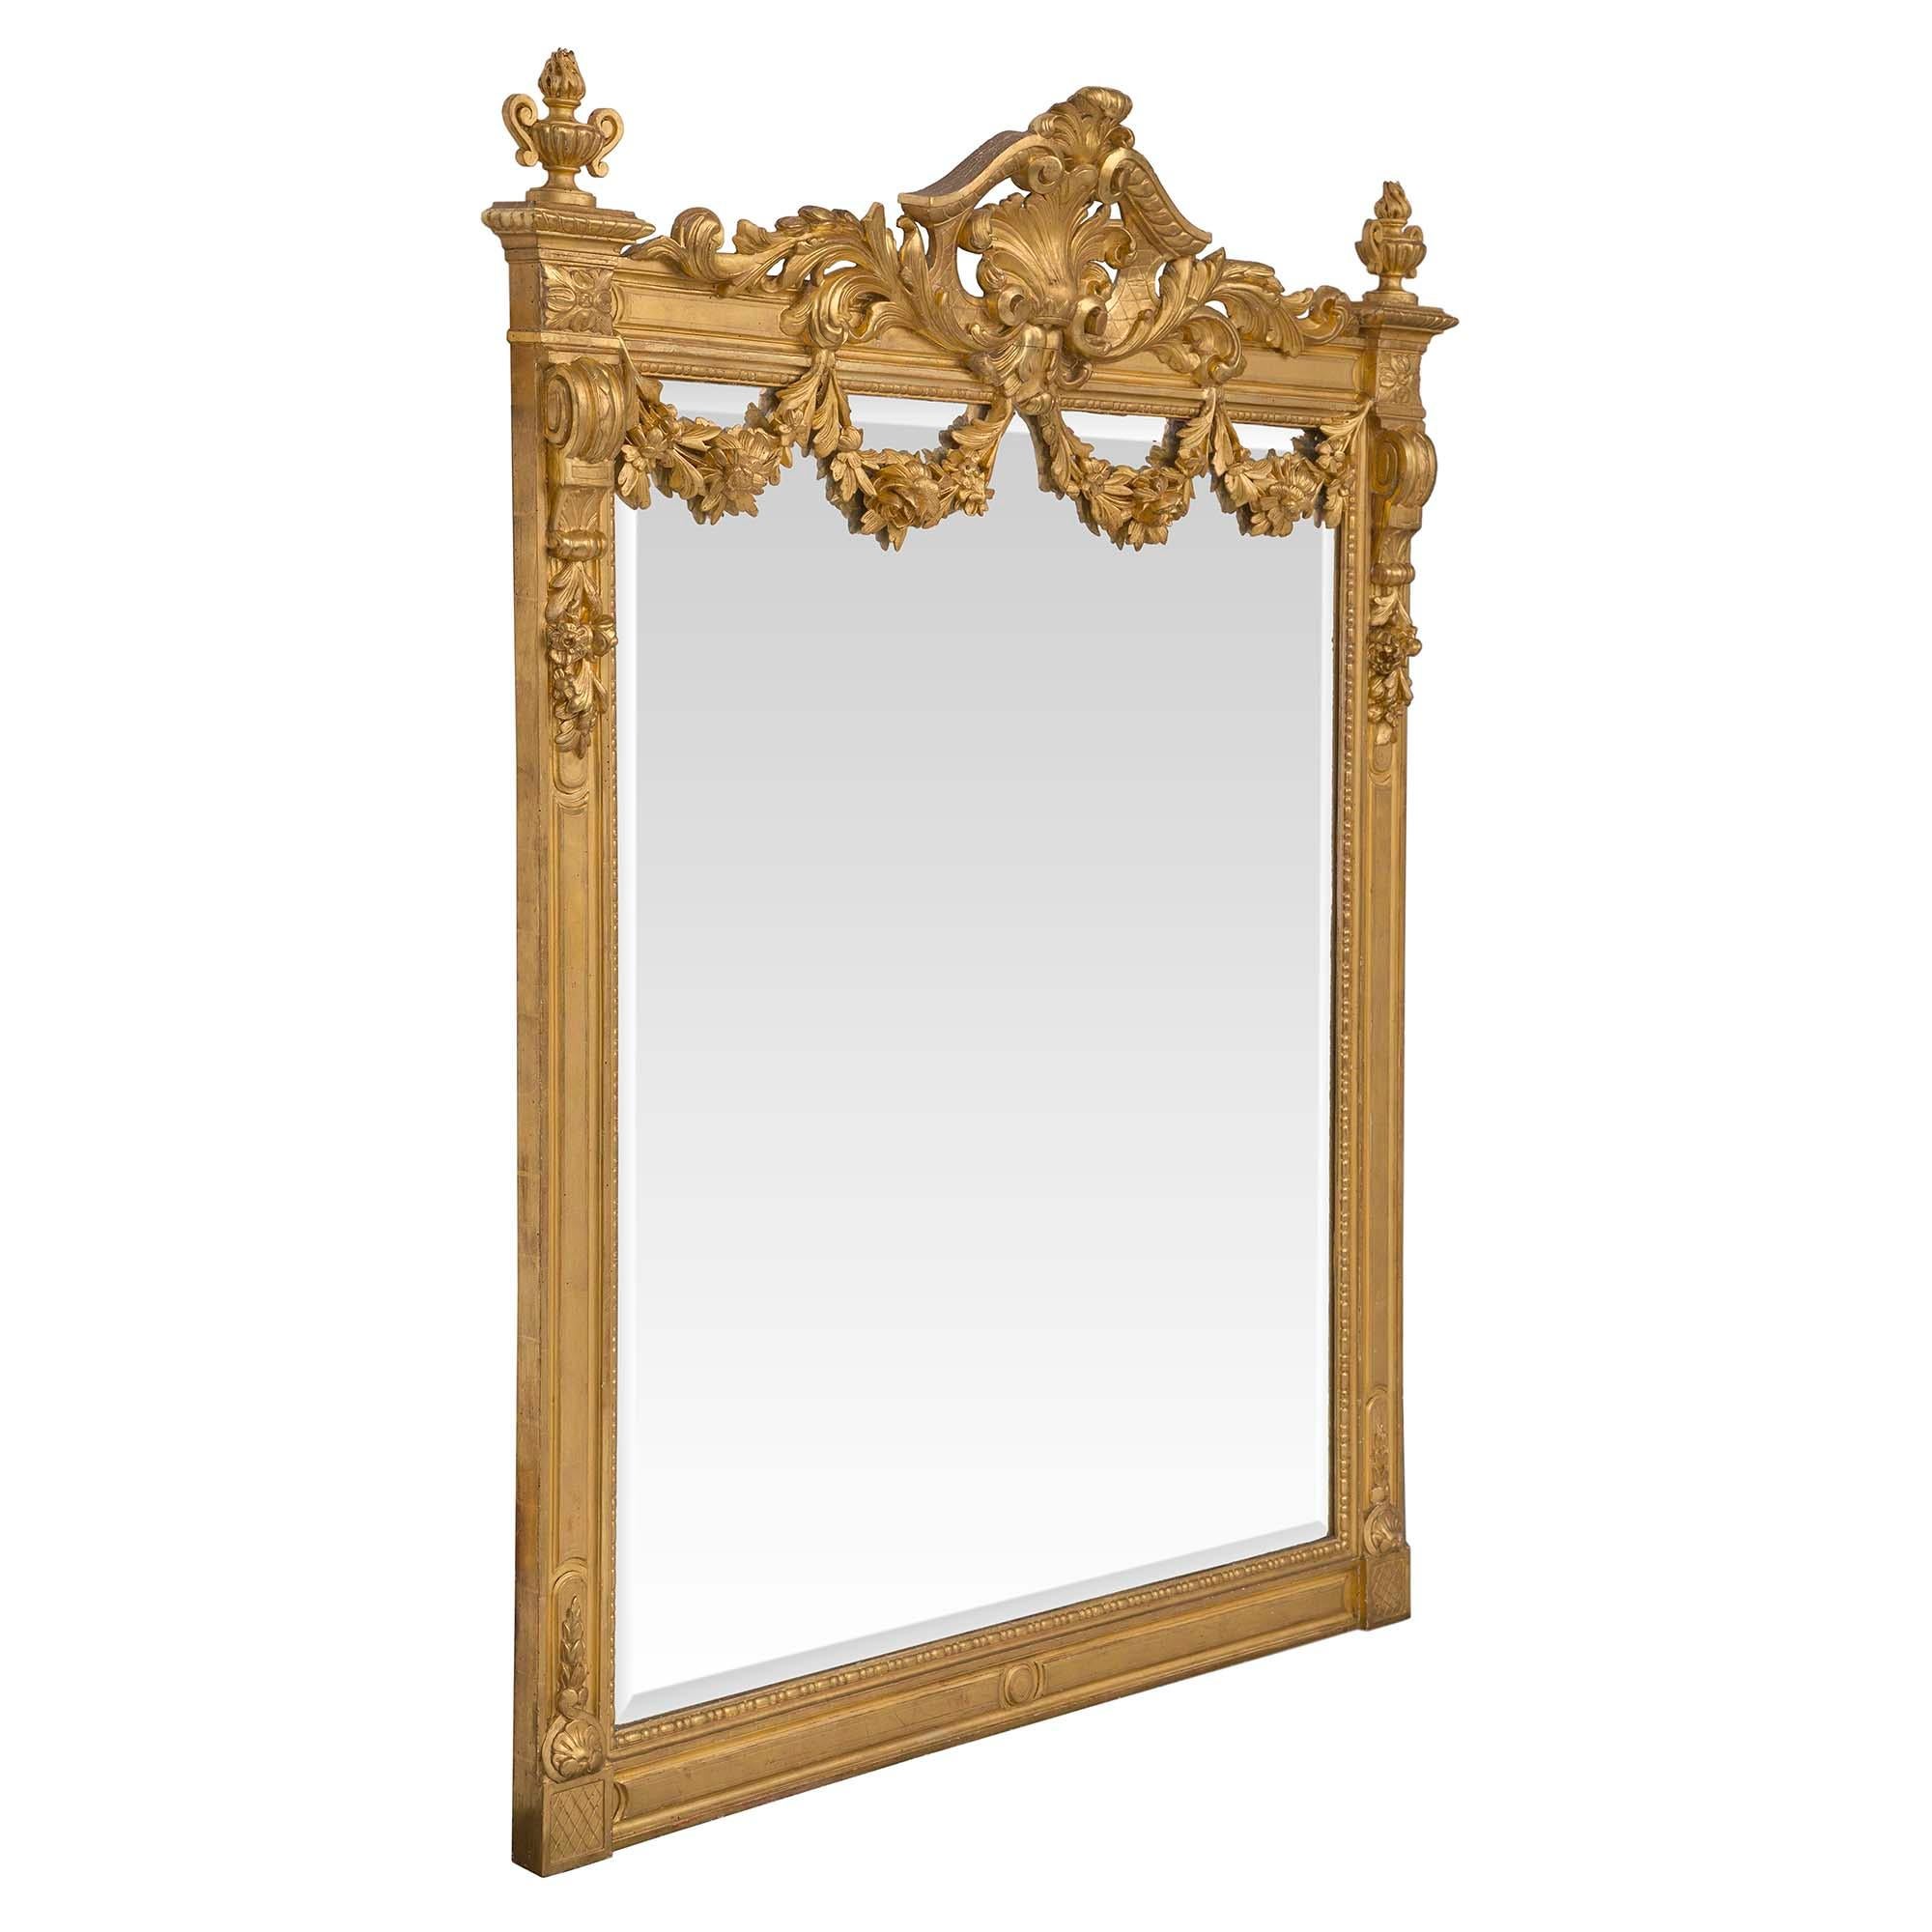 A magnificent French 19th century Louis XVI st. giltwood mirror. The original beveled mirror plate is framed within a decorative beaded design. The frame displays a circular bottom central reserve and block rosettes at each corner with a lattice